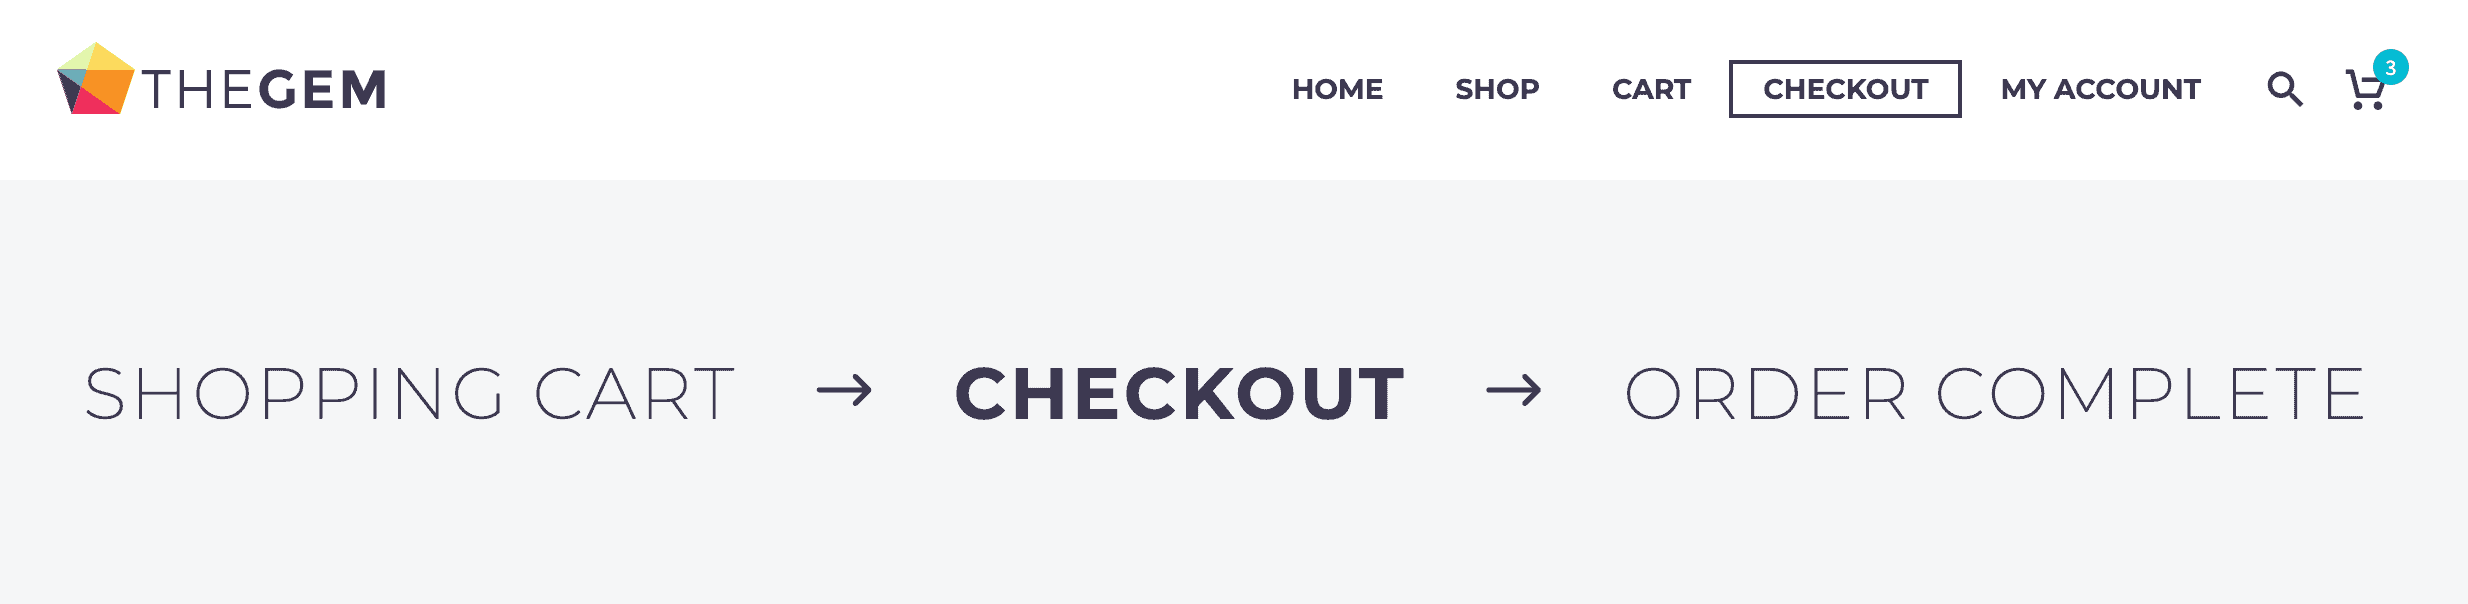 Screenshot of the checkout progress bar section from the theme The Gem as displayed on the checkout page.